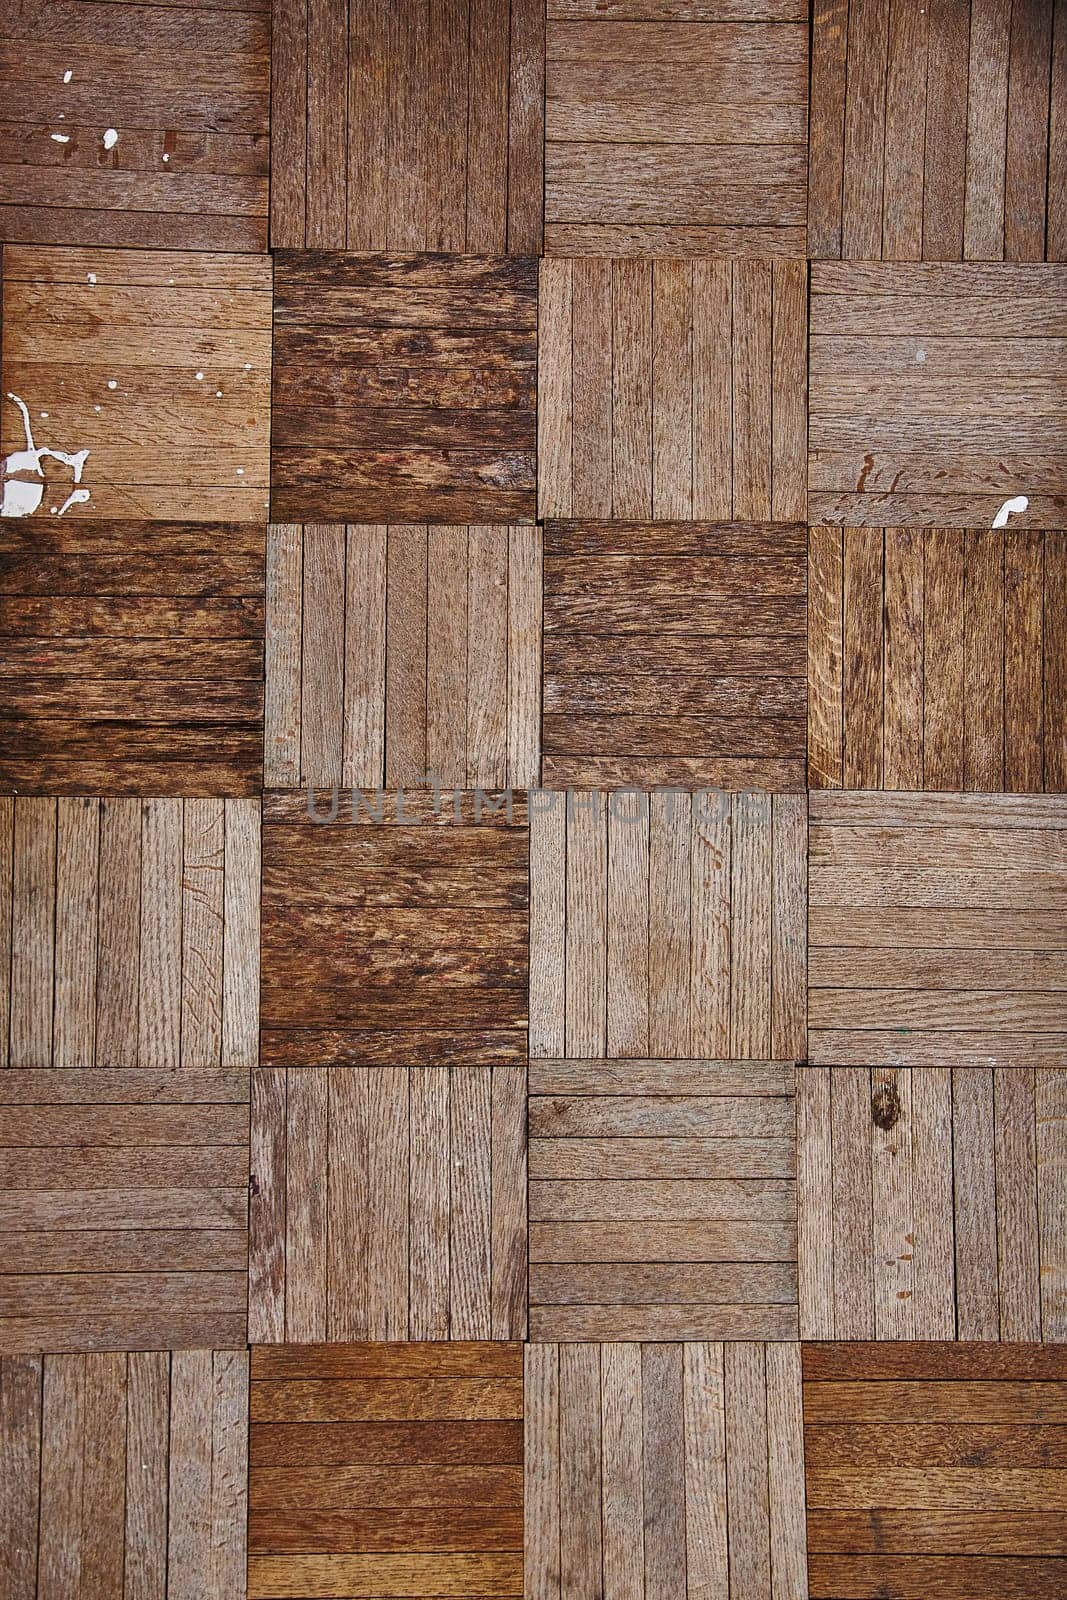 Diverse and elegant wooden floor with unique textures and tones, showcasing meticulous craftsmanship. Perfect for interior design and architectural concepts.